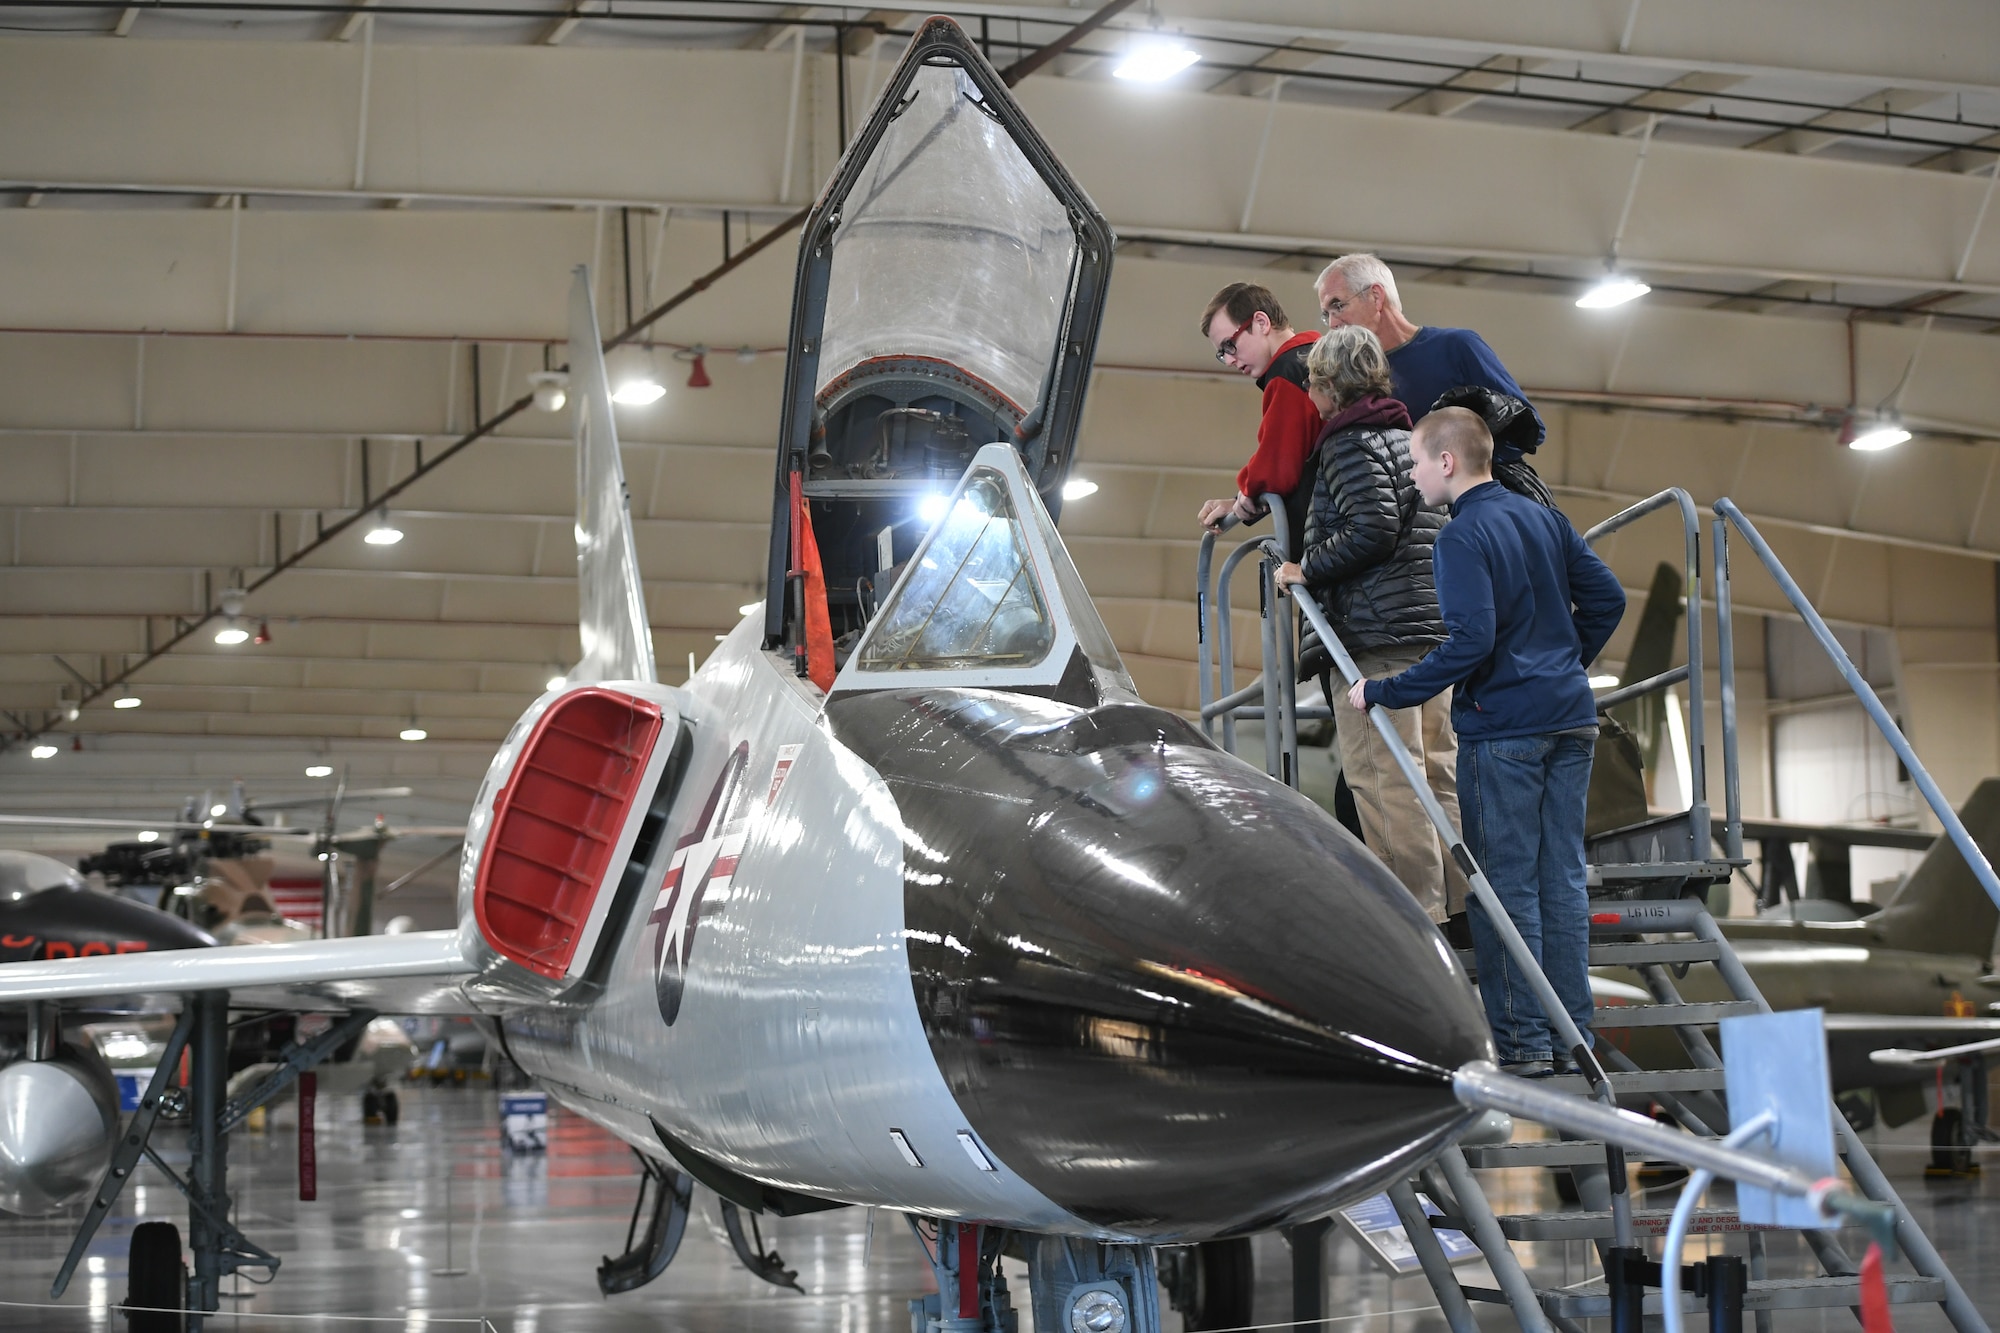 Visitors look into the cockpit of the Hill Aerospace Museum’s Convair F-106 Dec. 20, 2019, at Hill Air Force Base, Utah. The museum recently celebrated its 5 millionth visitor in November 2019. (U.S. Air Force photo by Cynthia Griggs)